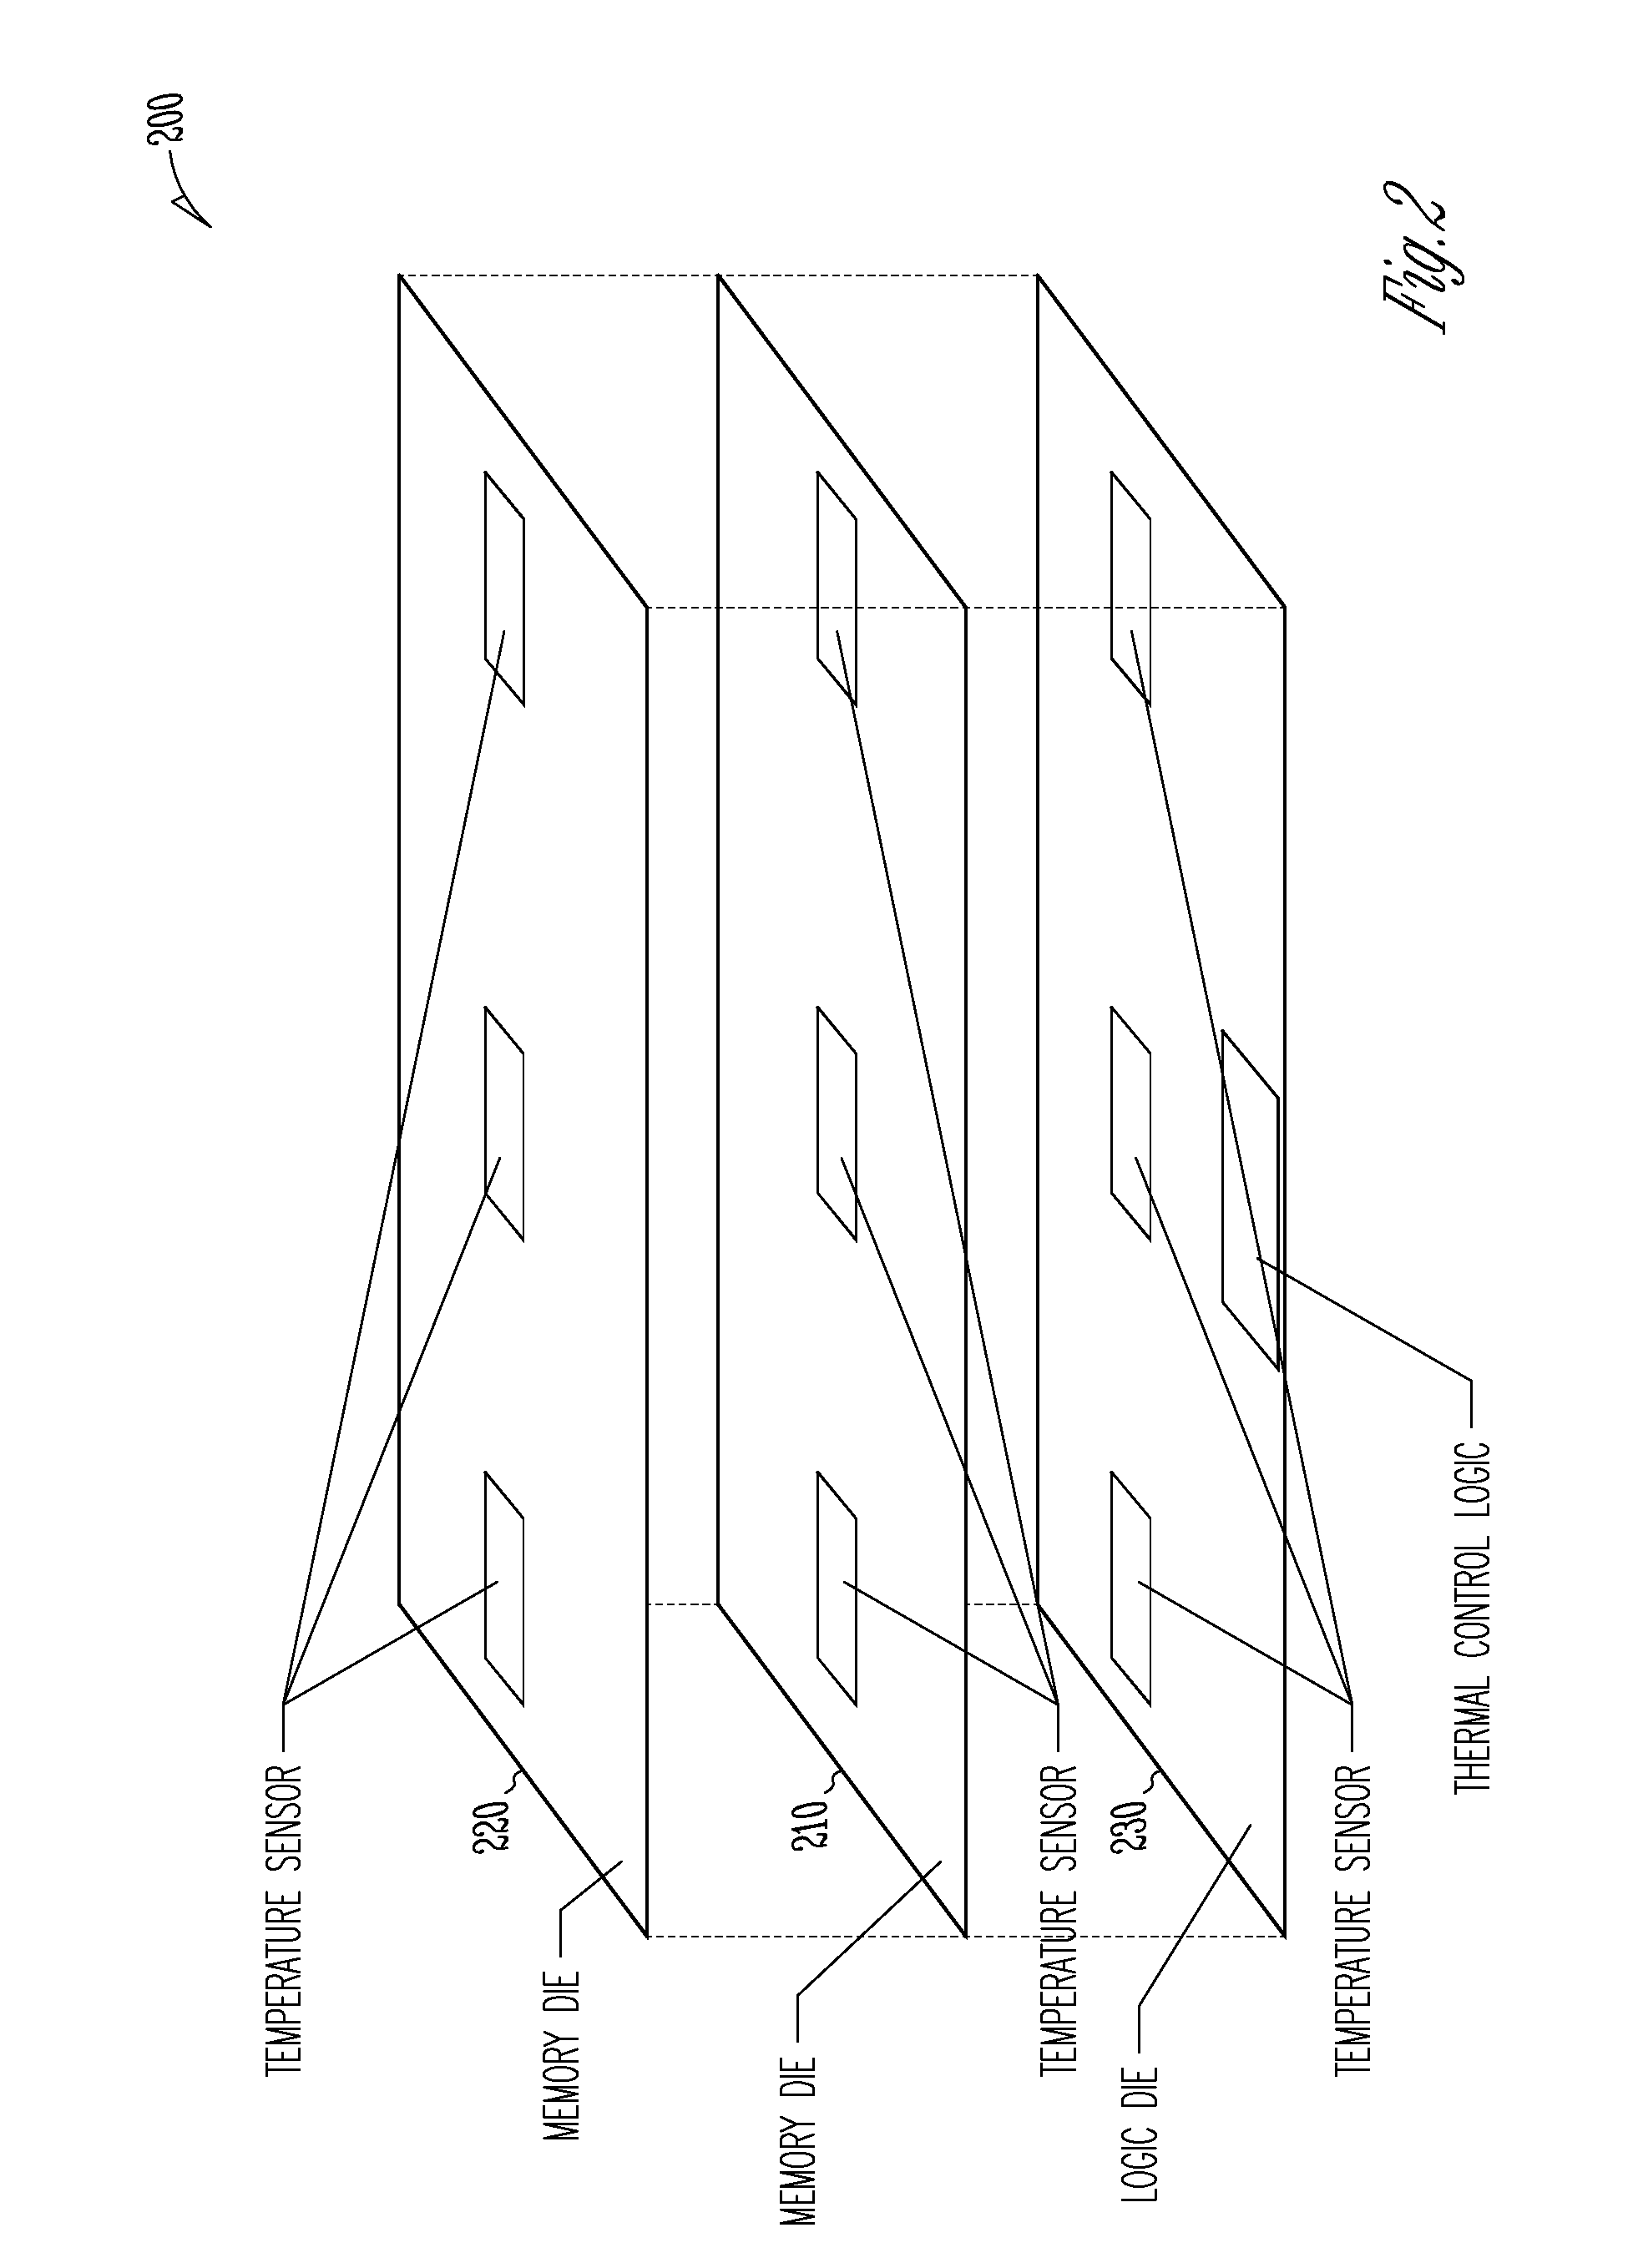 Systems and methods for memory system management based on thermal information of a memory system